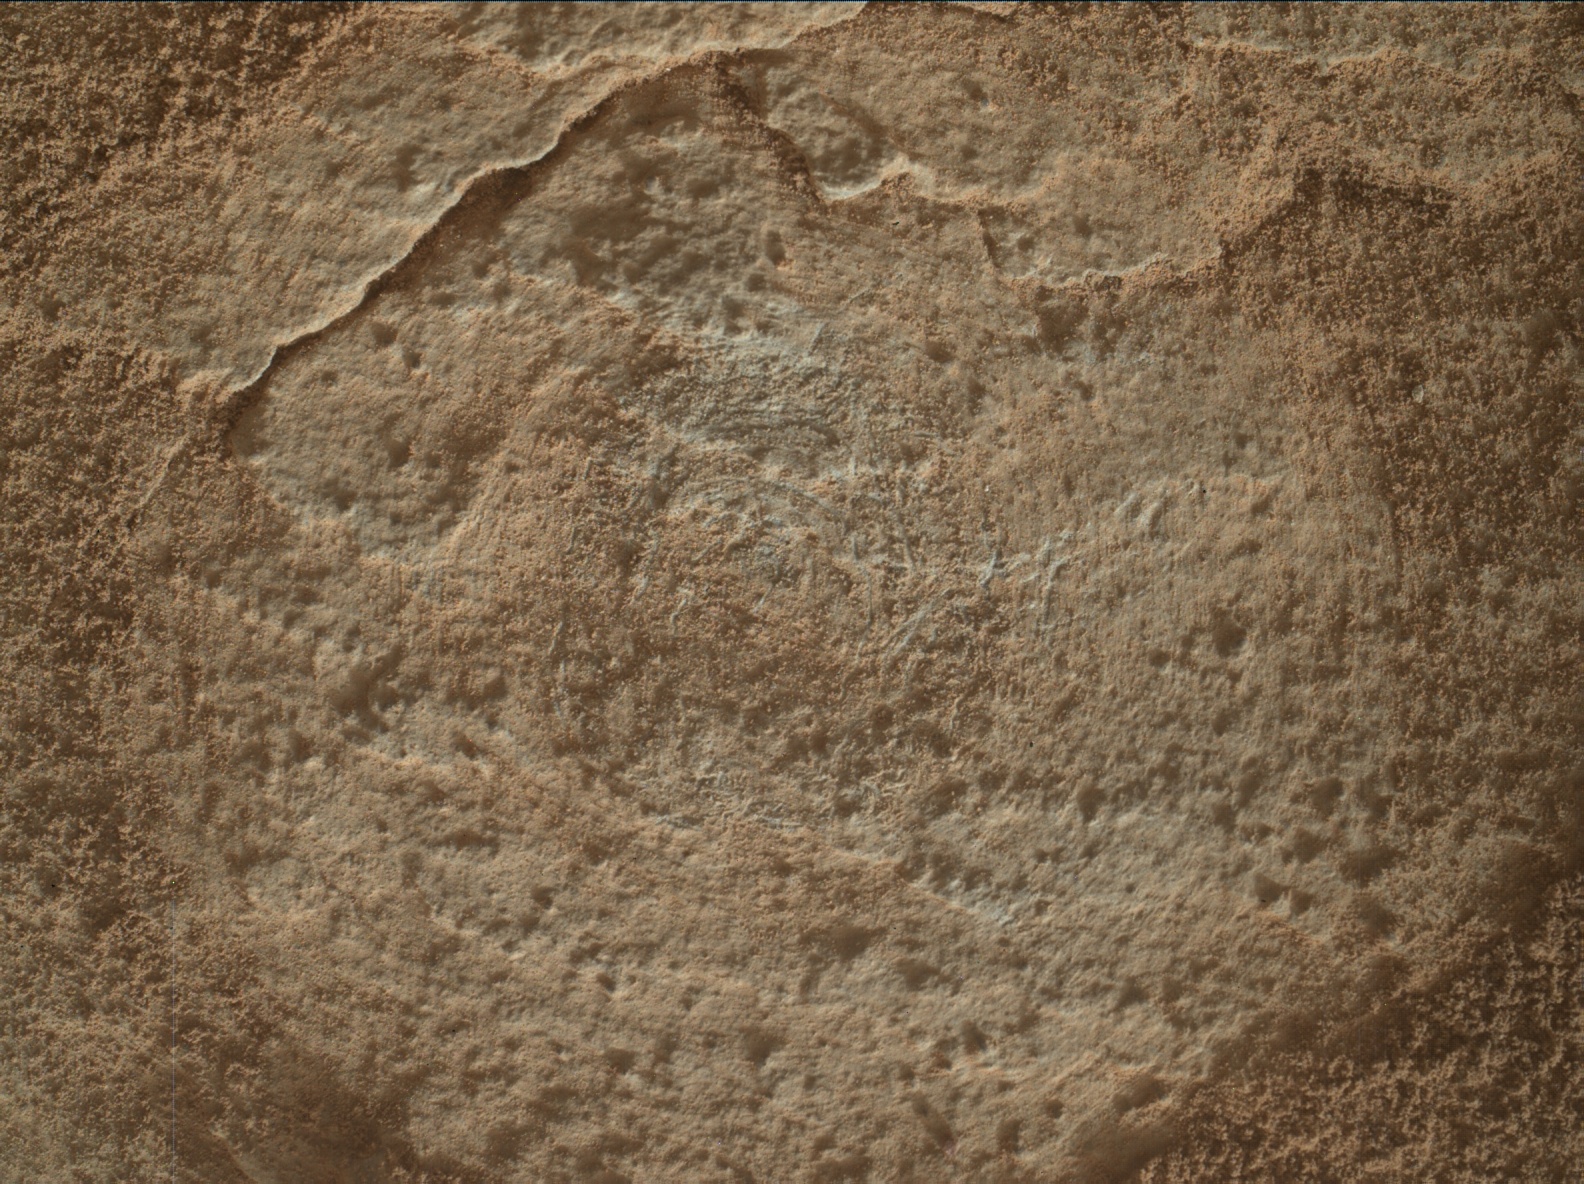 Nasa's Mars rover Curiosity acquired this image using its Mars Hand Lens Imager (MAHLI) on Sol 3396